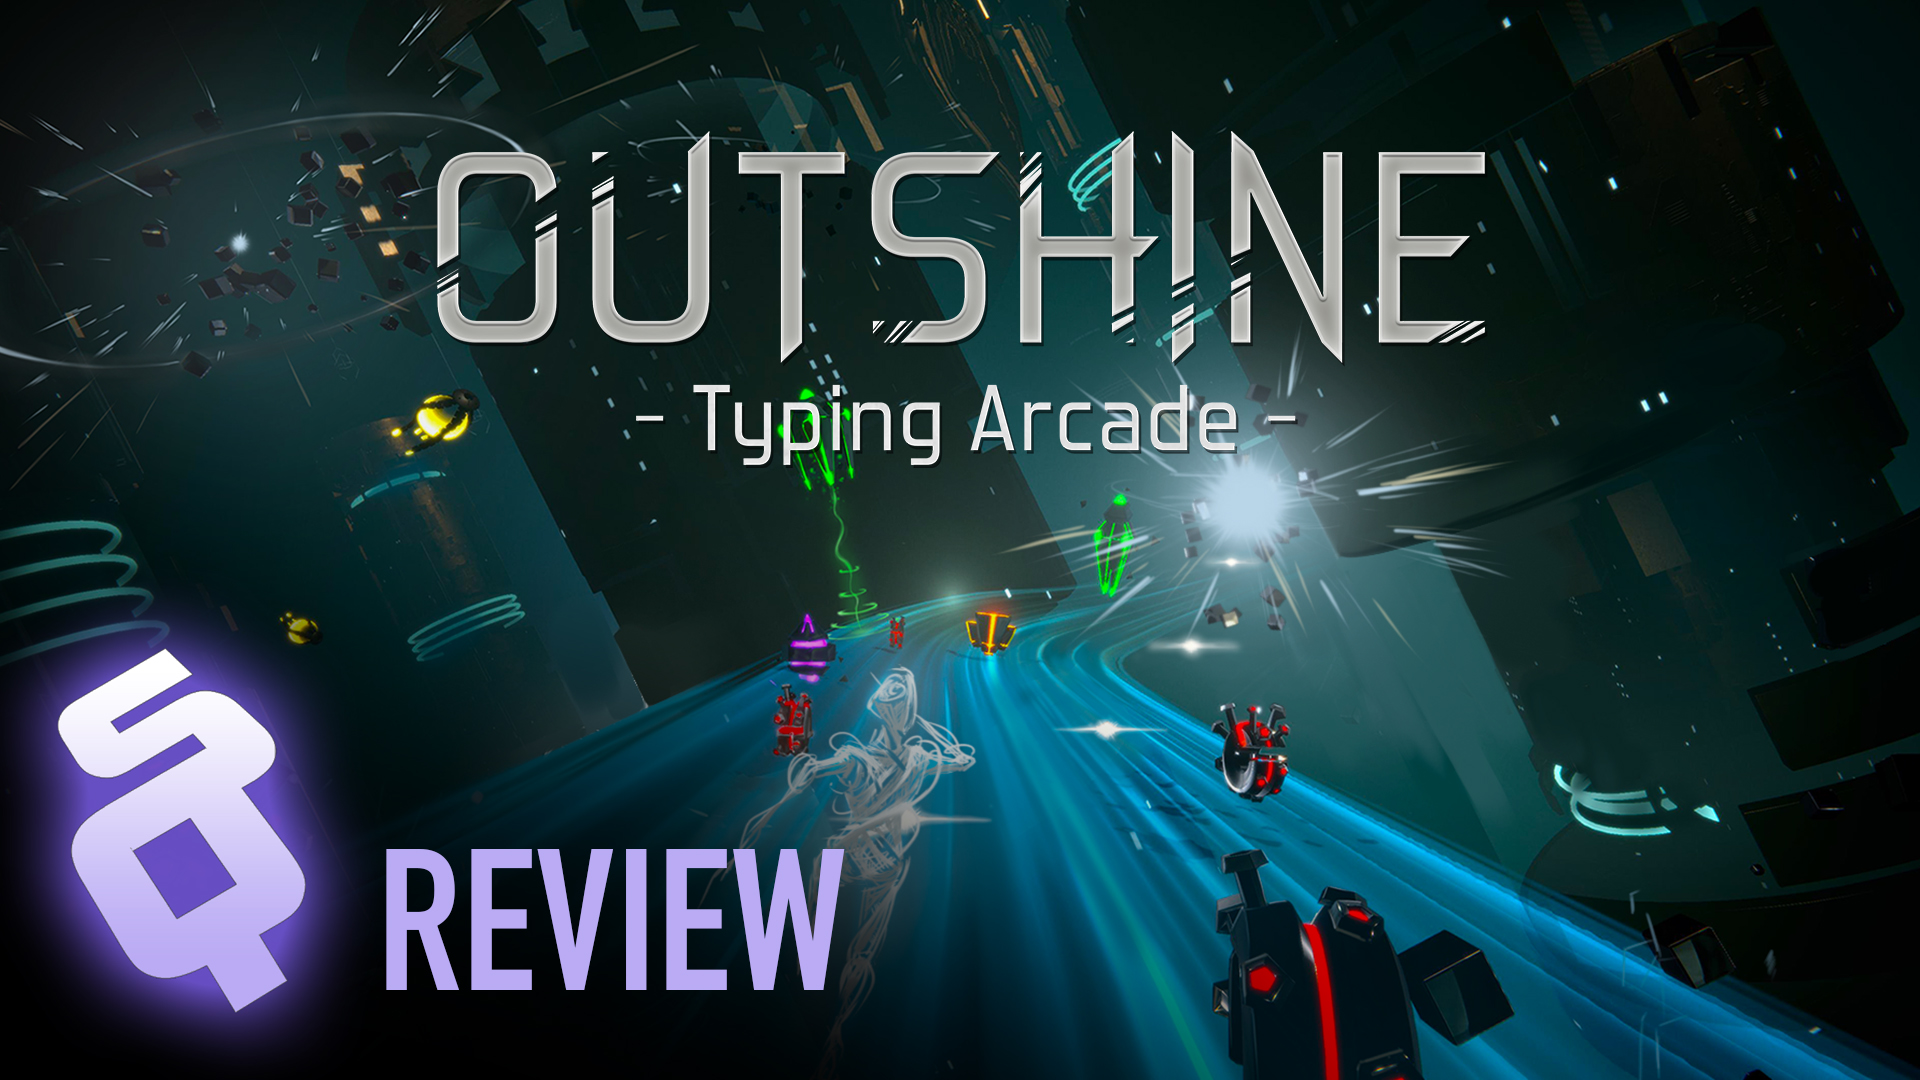 Outshine review